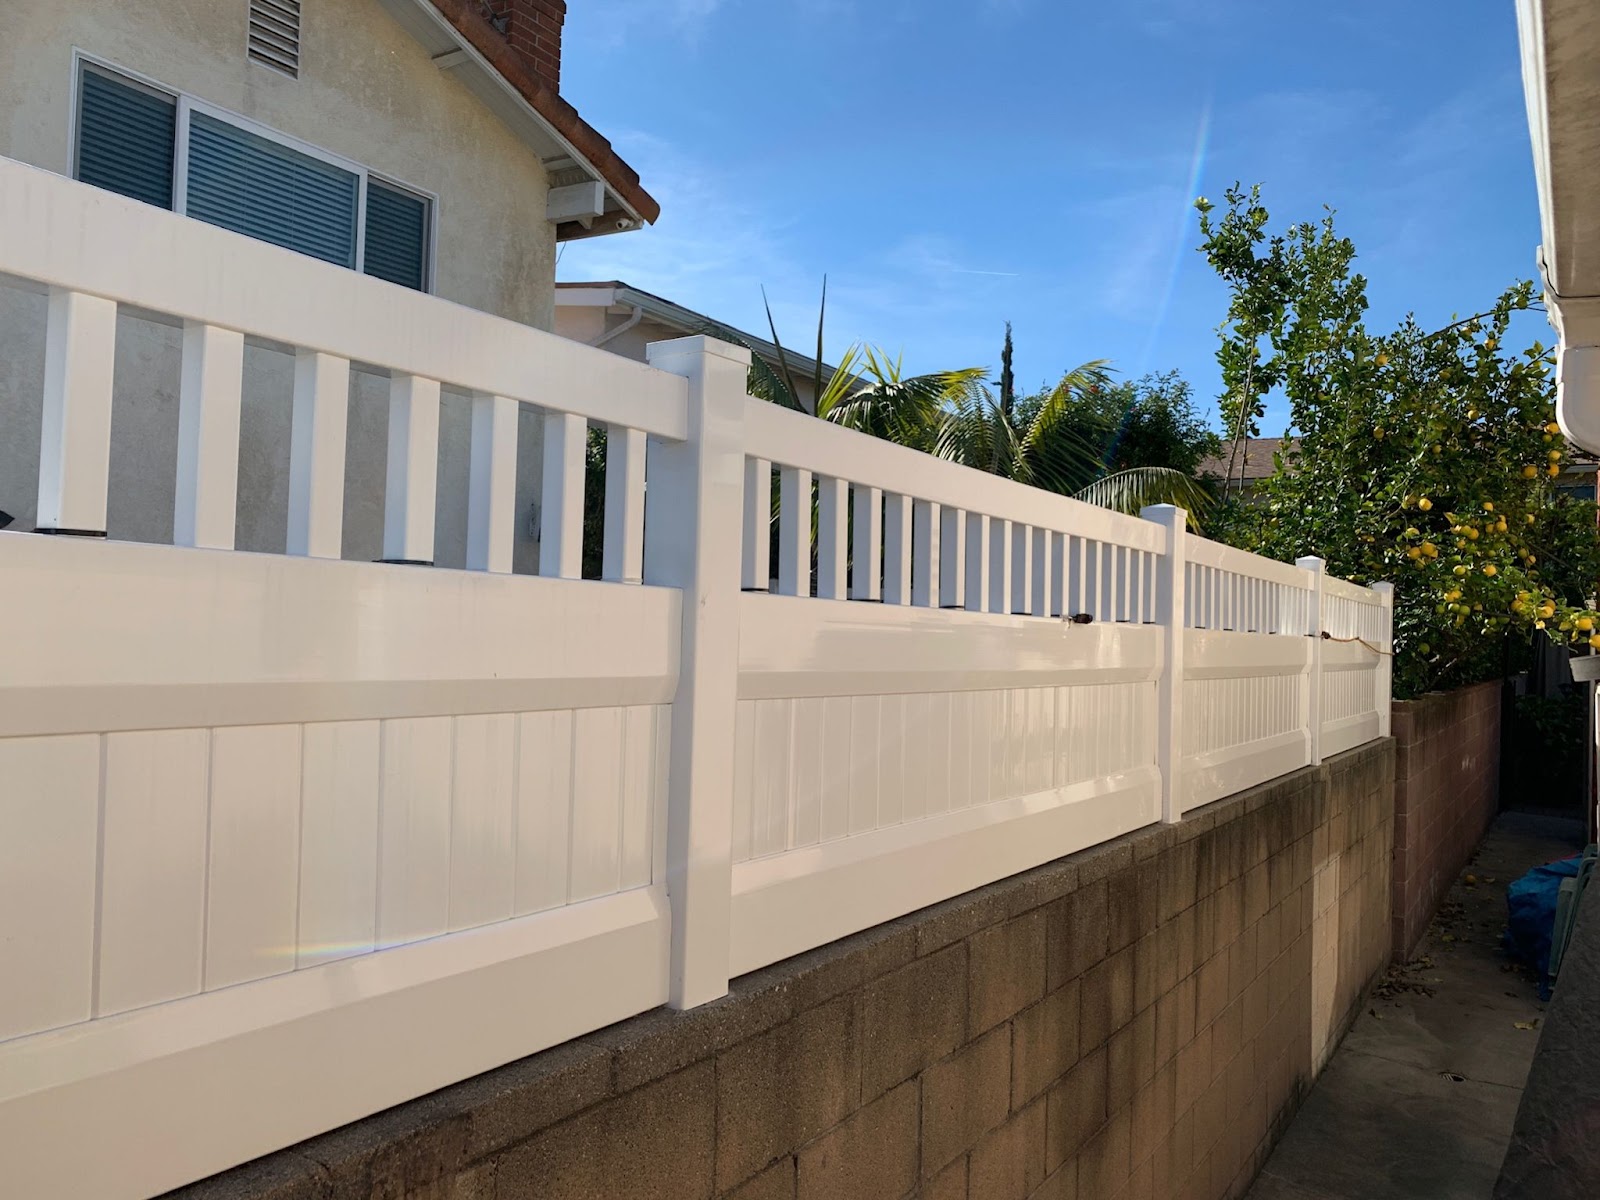 fence toppers for privacy